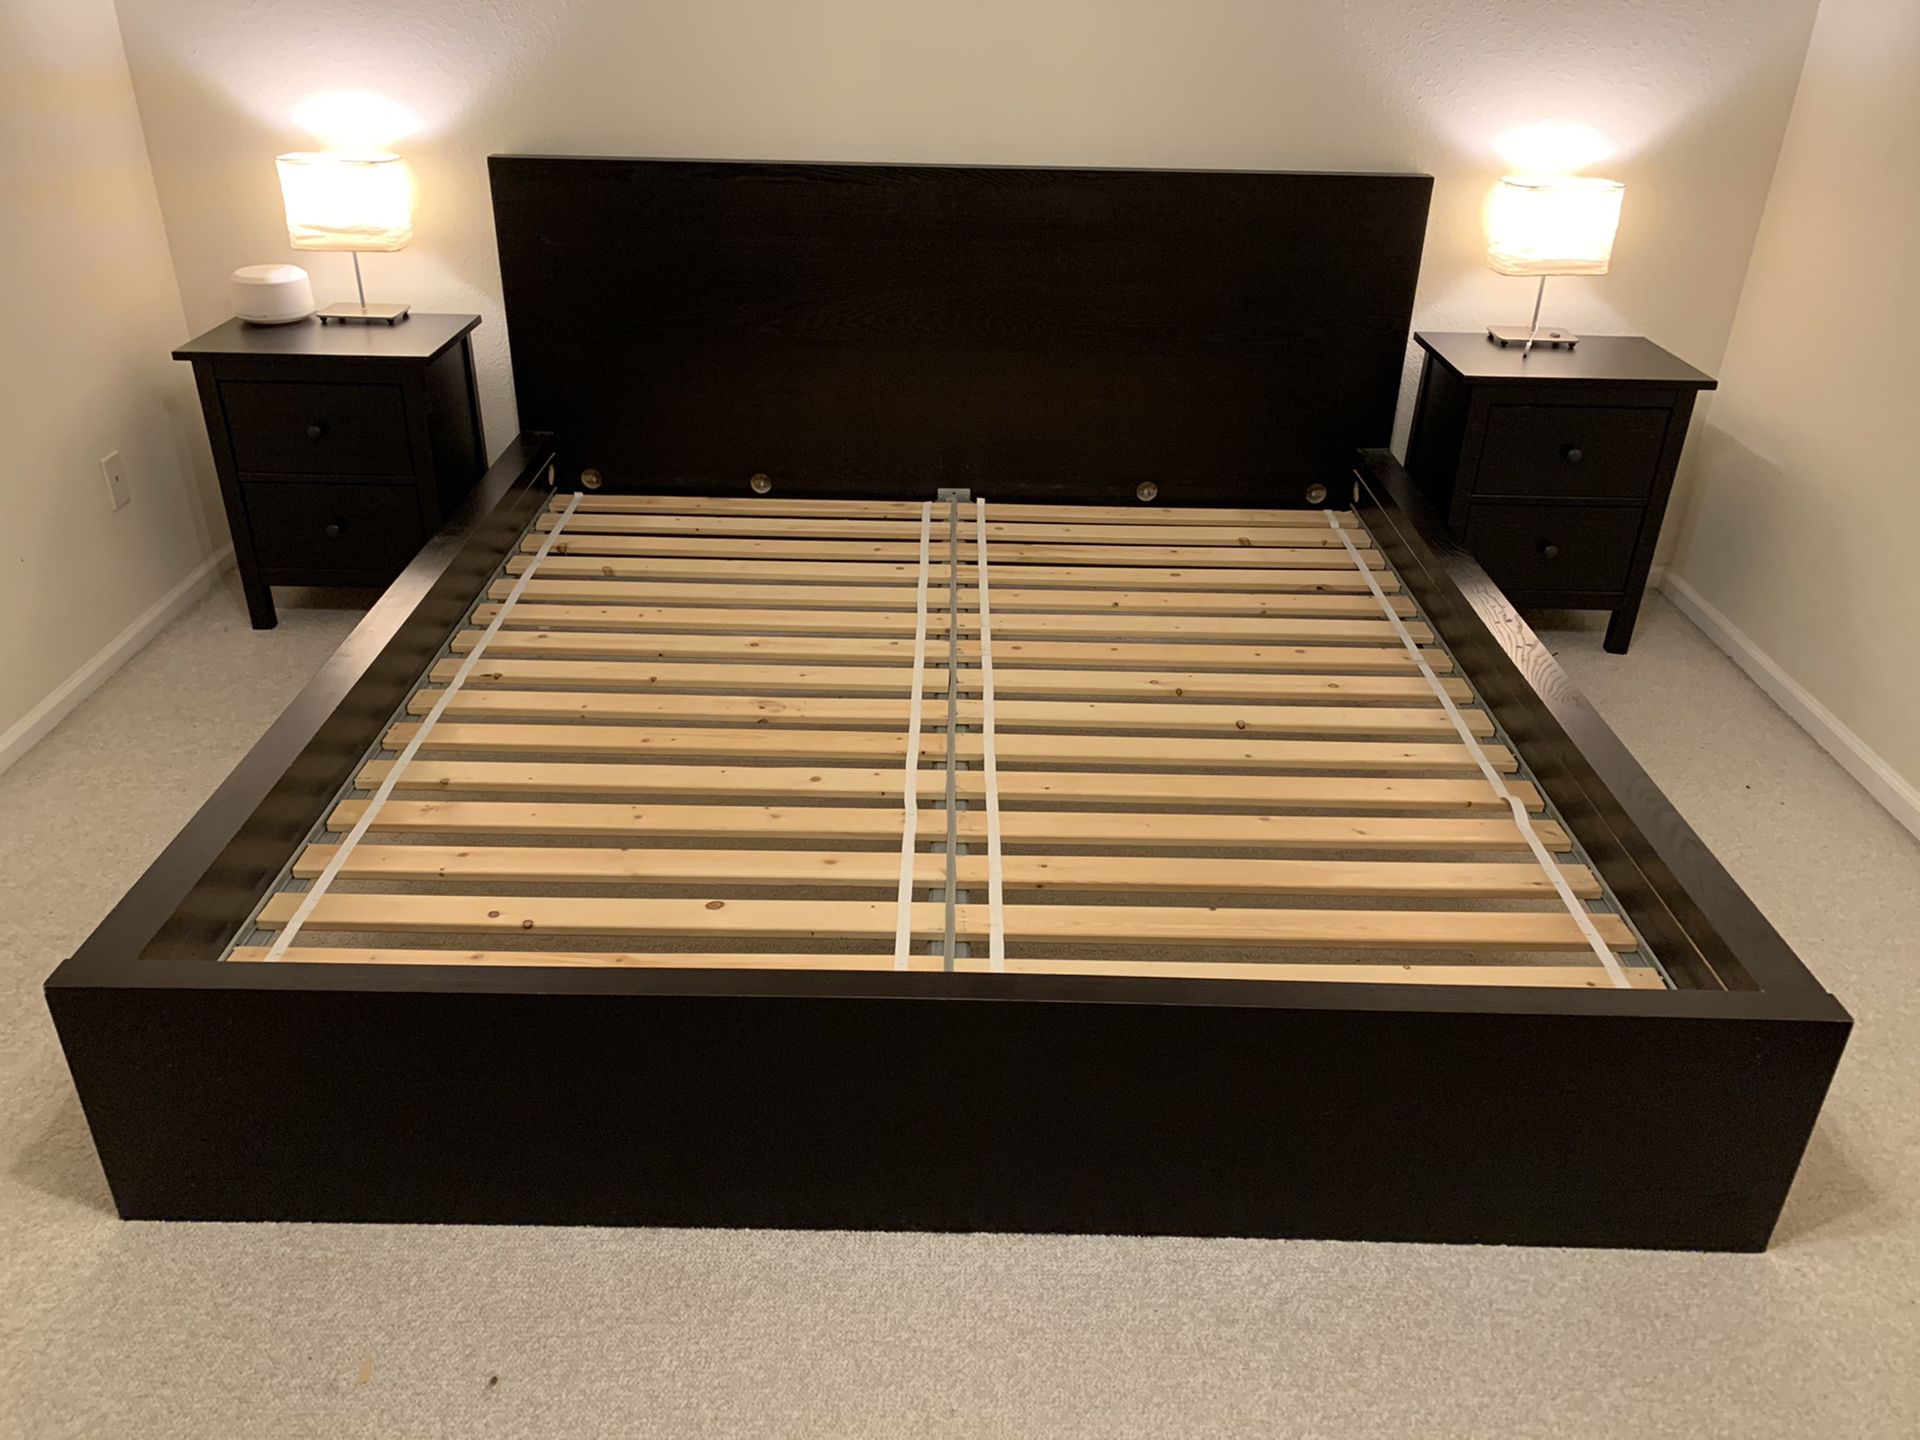 King size platform bed frame with matching night stands